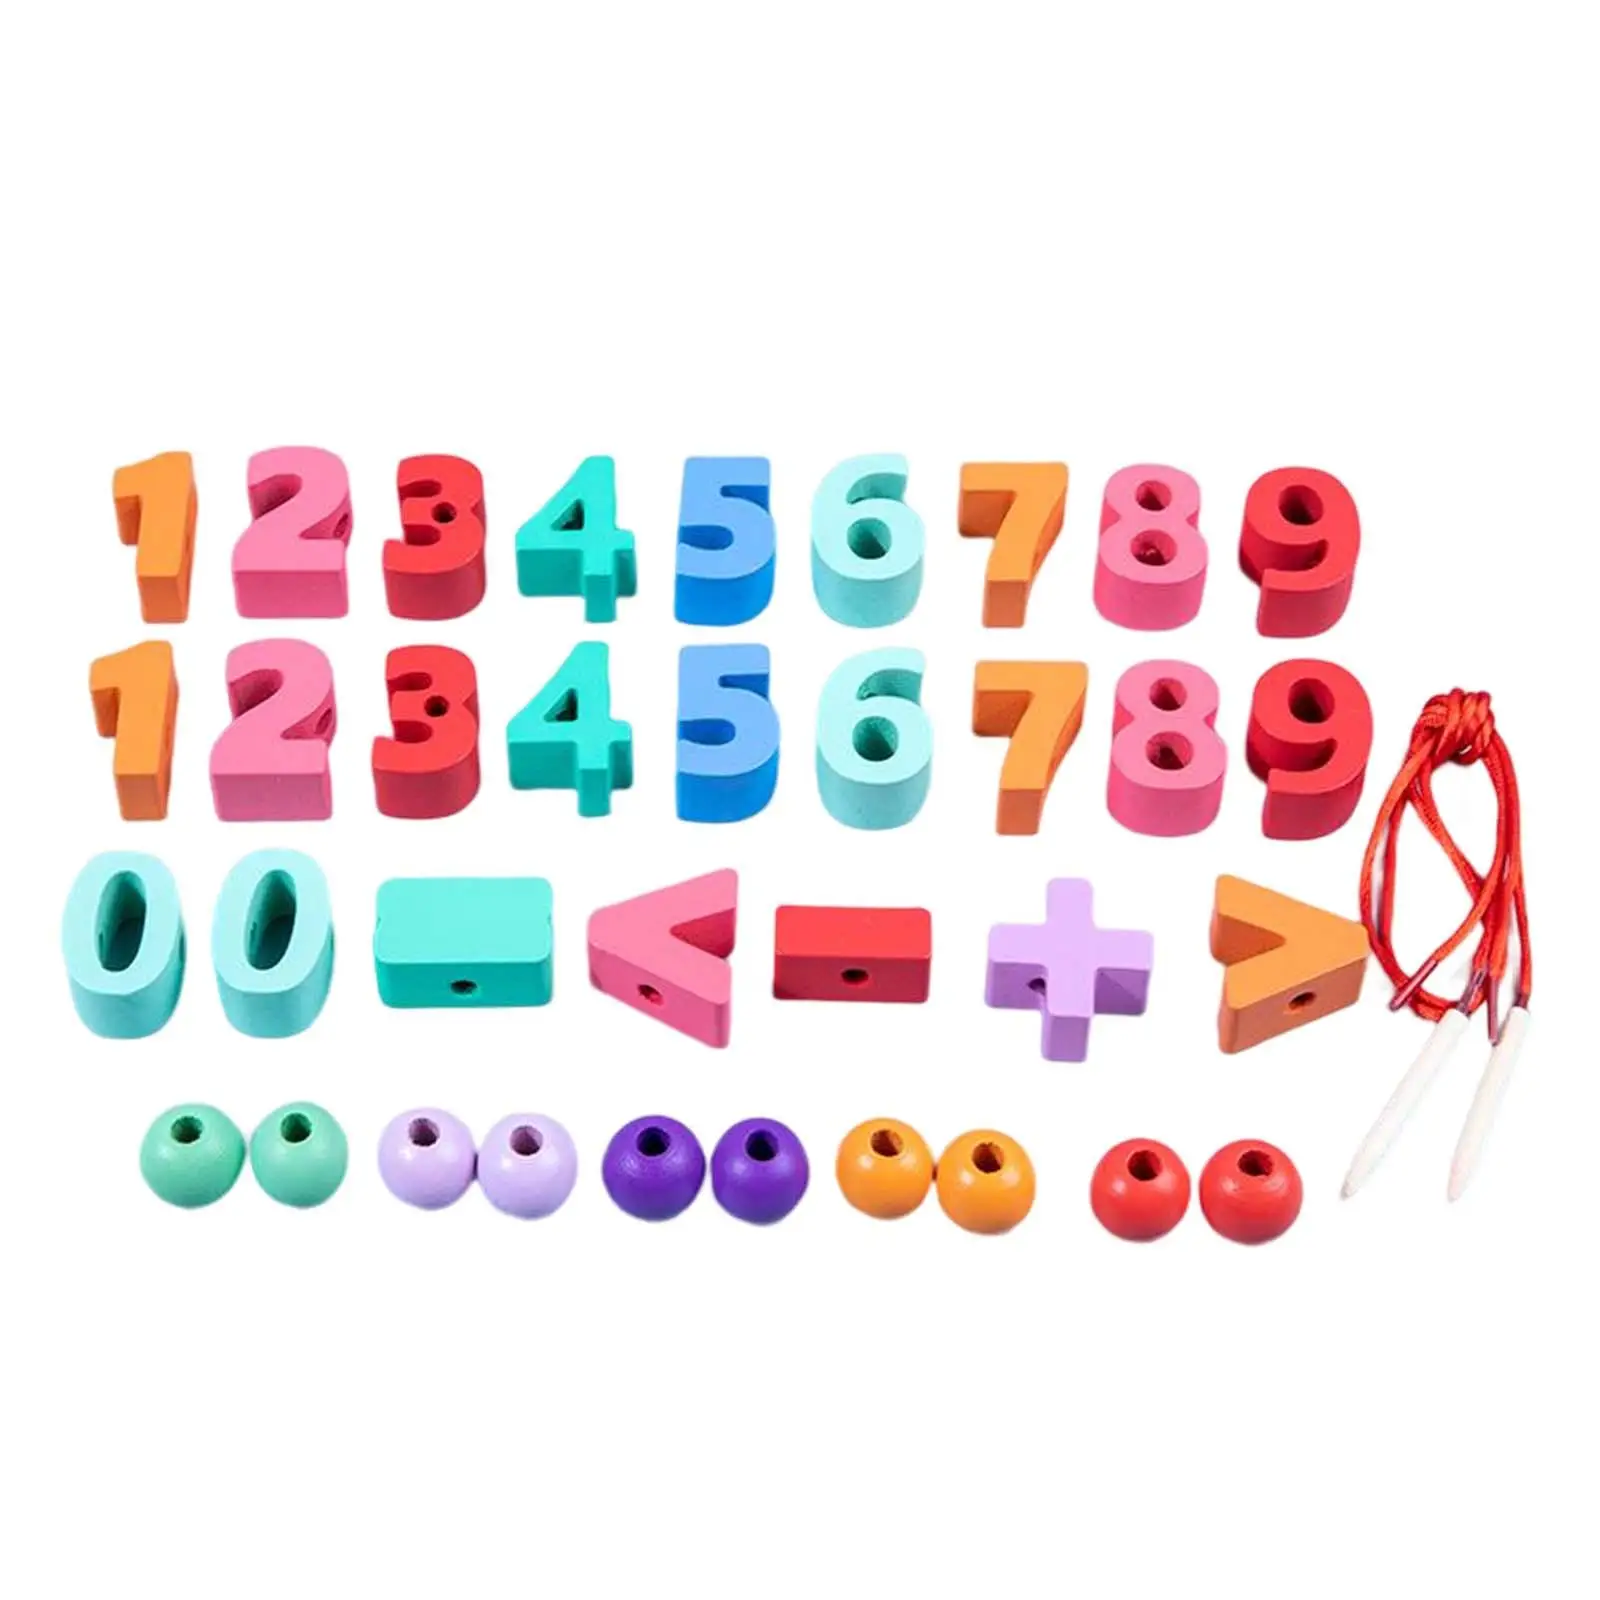 Wooden Threading Toys Developmental Toy Lacing Beads Set for Birthday Gifts